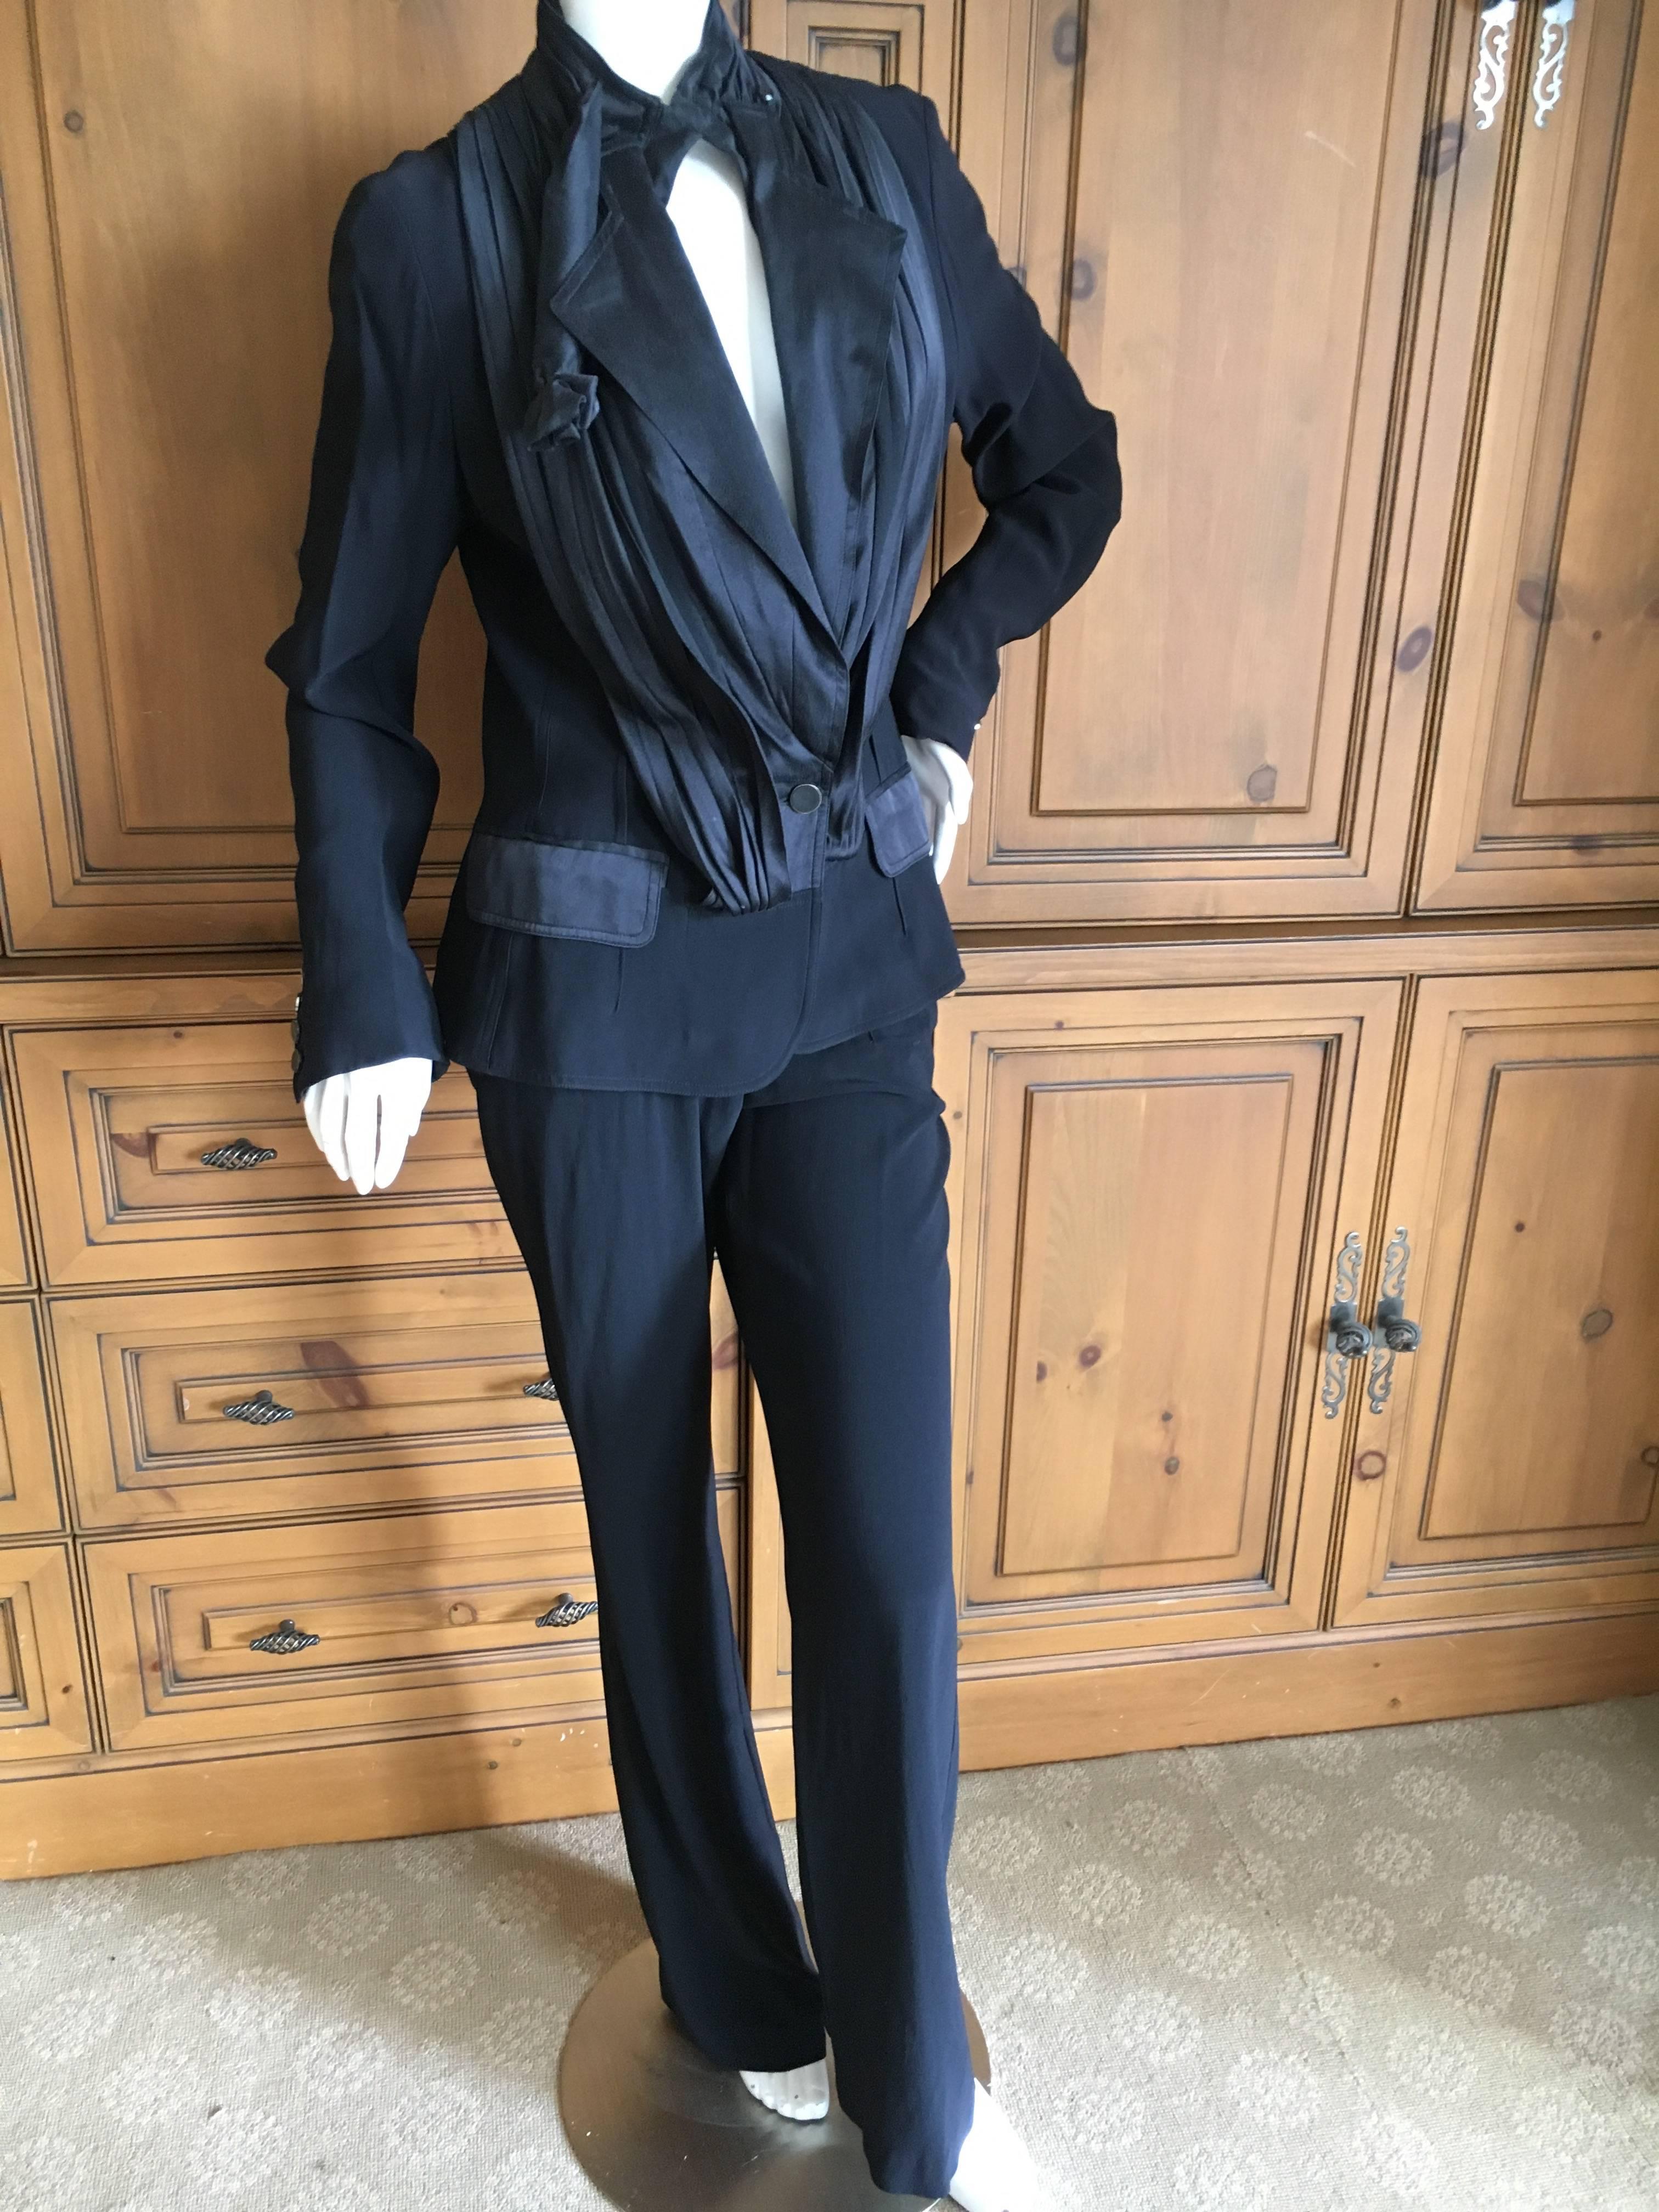 John Galliano 1990's Black Tuxedo
Featuring pants with contrasting tuxedo stripe and jacket.
Size 42
Bust 40